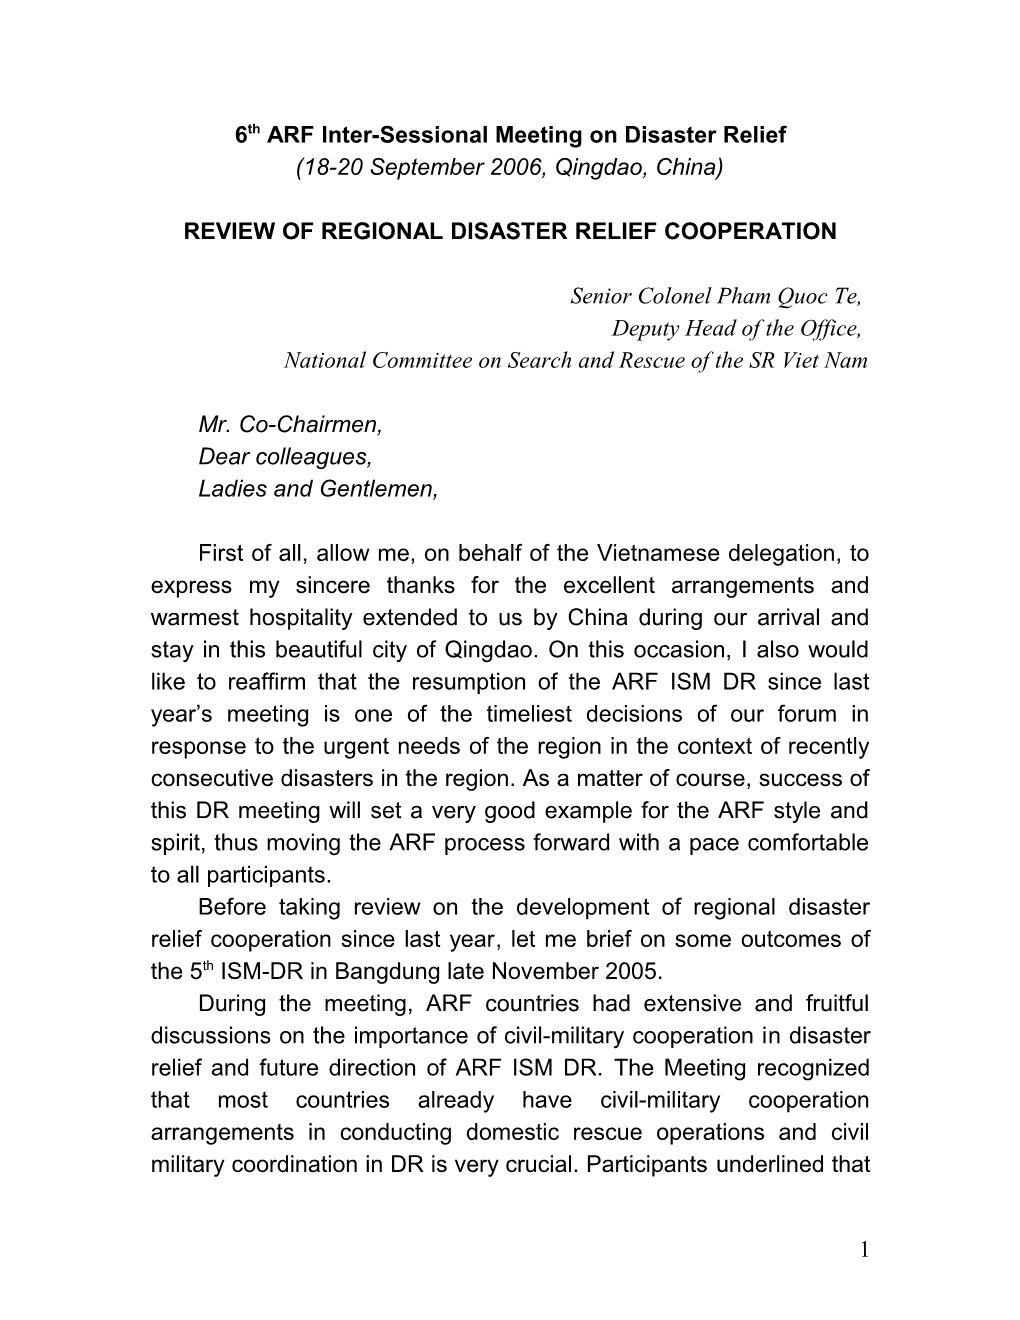 Review of Regional Disaster Relief Cooperation